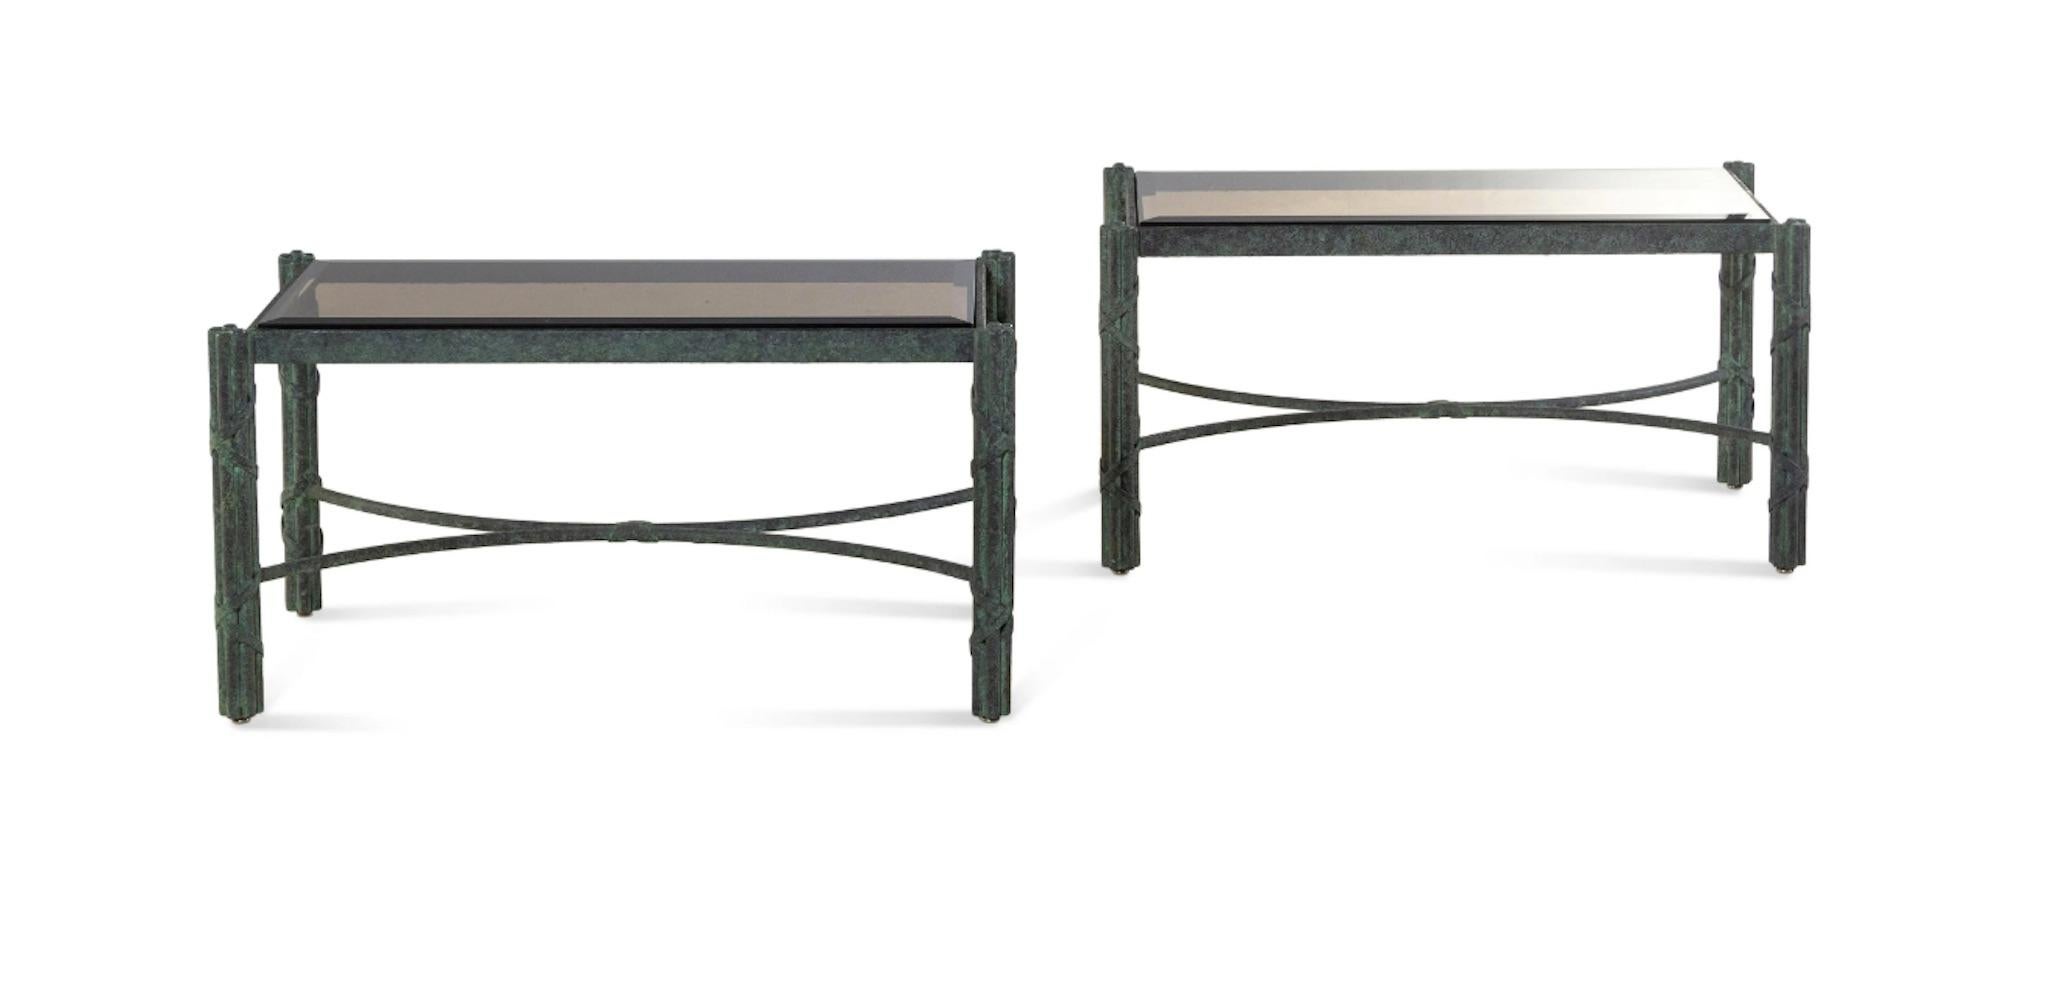 A pair of modern patinated bronze smoky glass-top low tables/benches
These are currently low tables but could easily have a cusion made making them a pair of benches. Priced per table/bench.
20th century
Measures: Height 18 x width 35 3/4 x depth